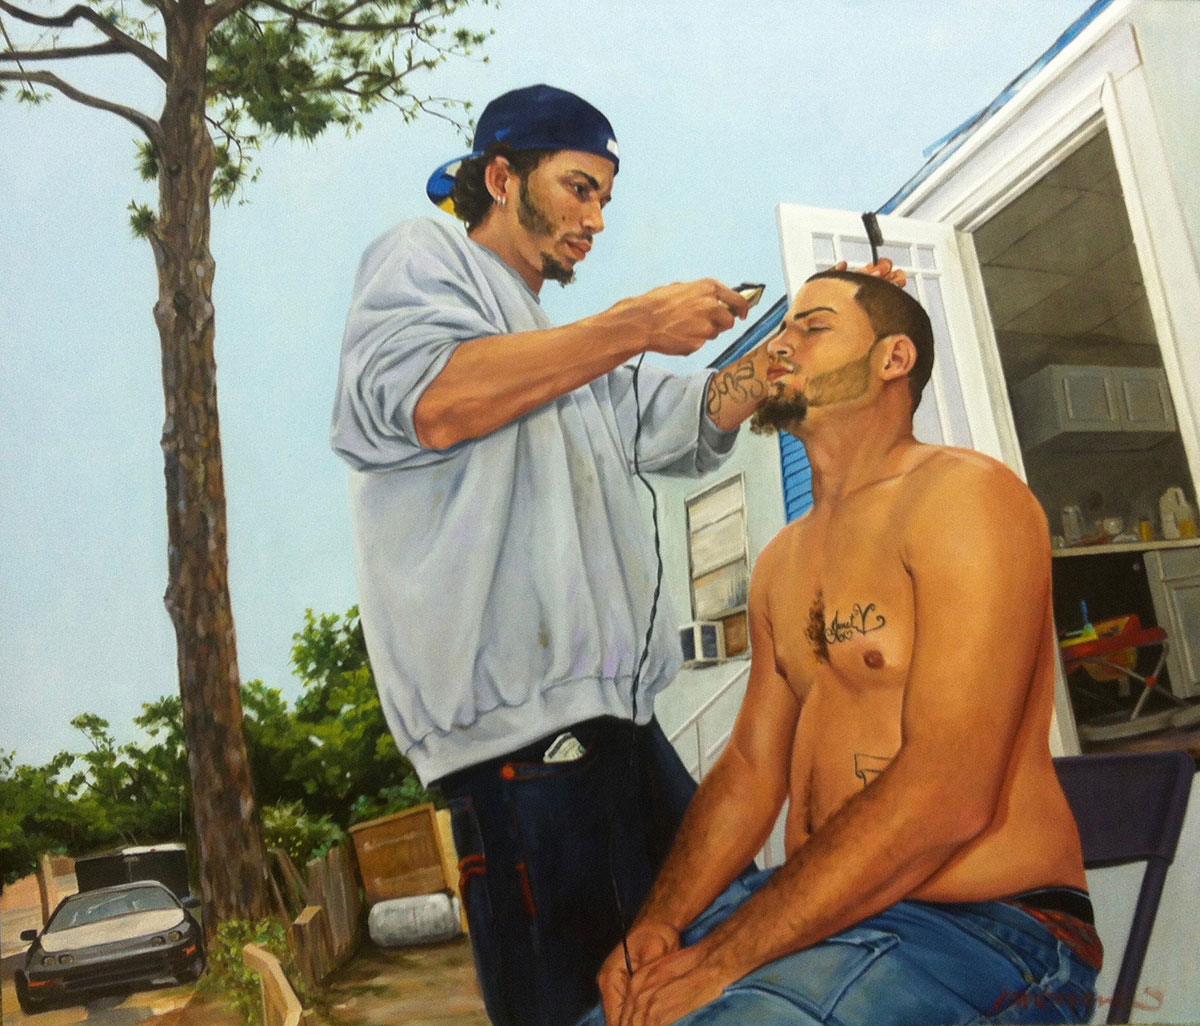 Part of Carbonara’s fascination with mobile home parks is how life takes place outside the confines of the trailer, such as this one depicting a haircut.